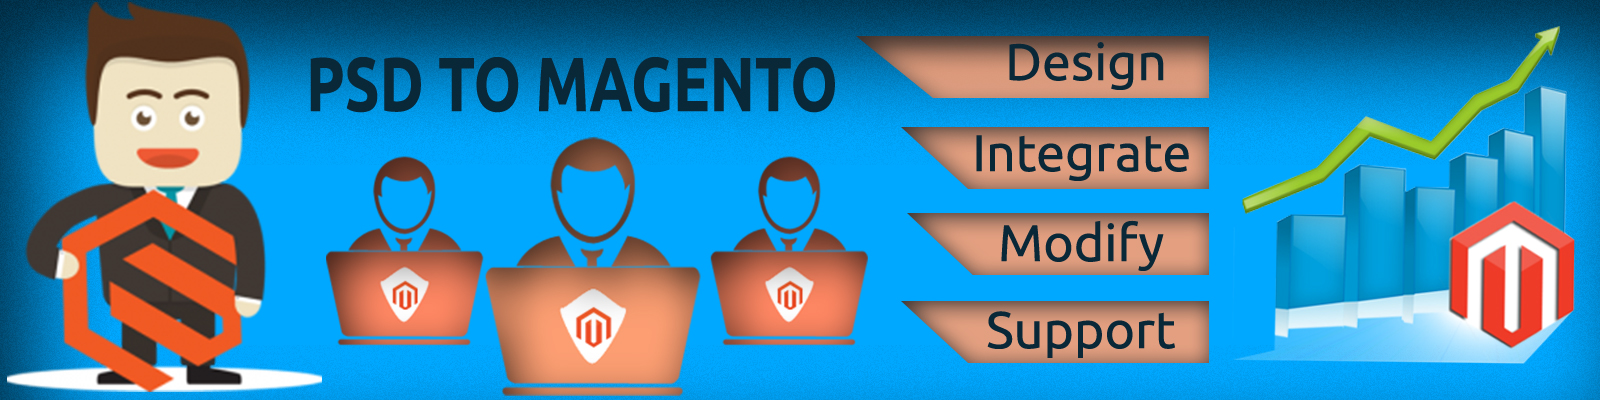 psd to magento conversion services